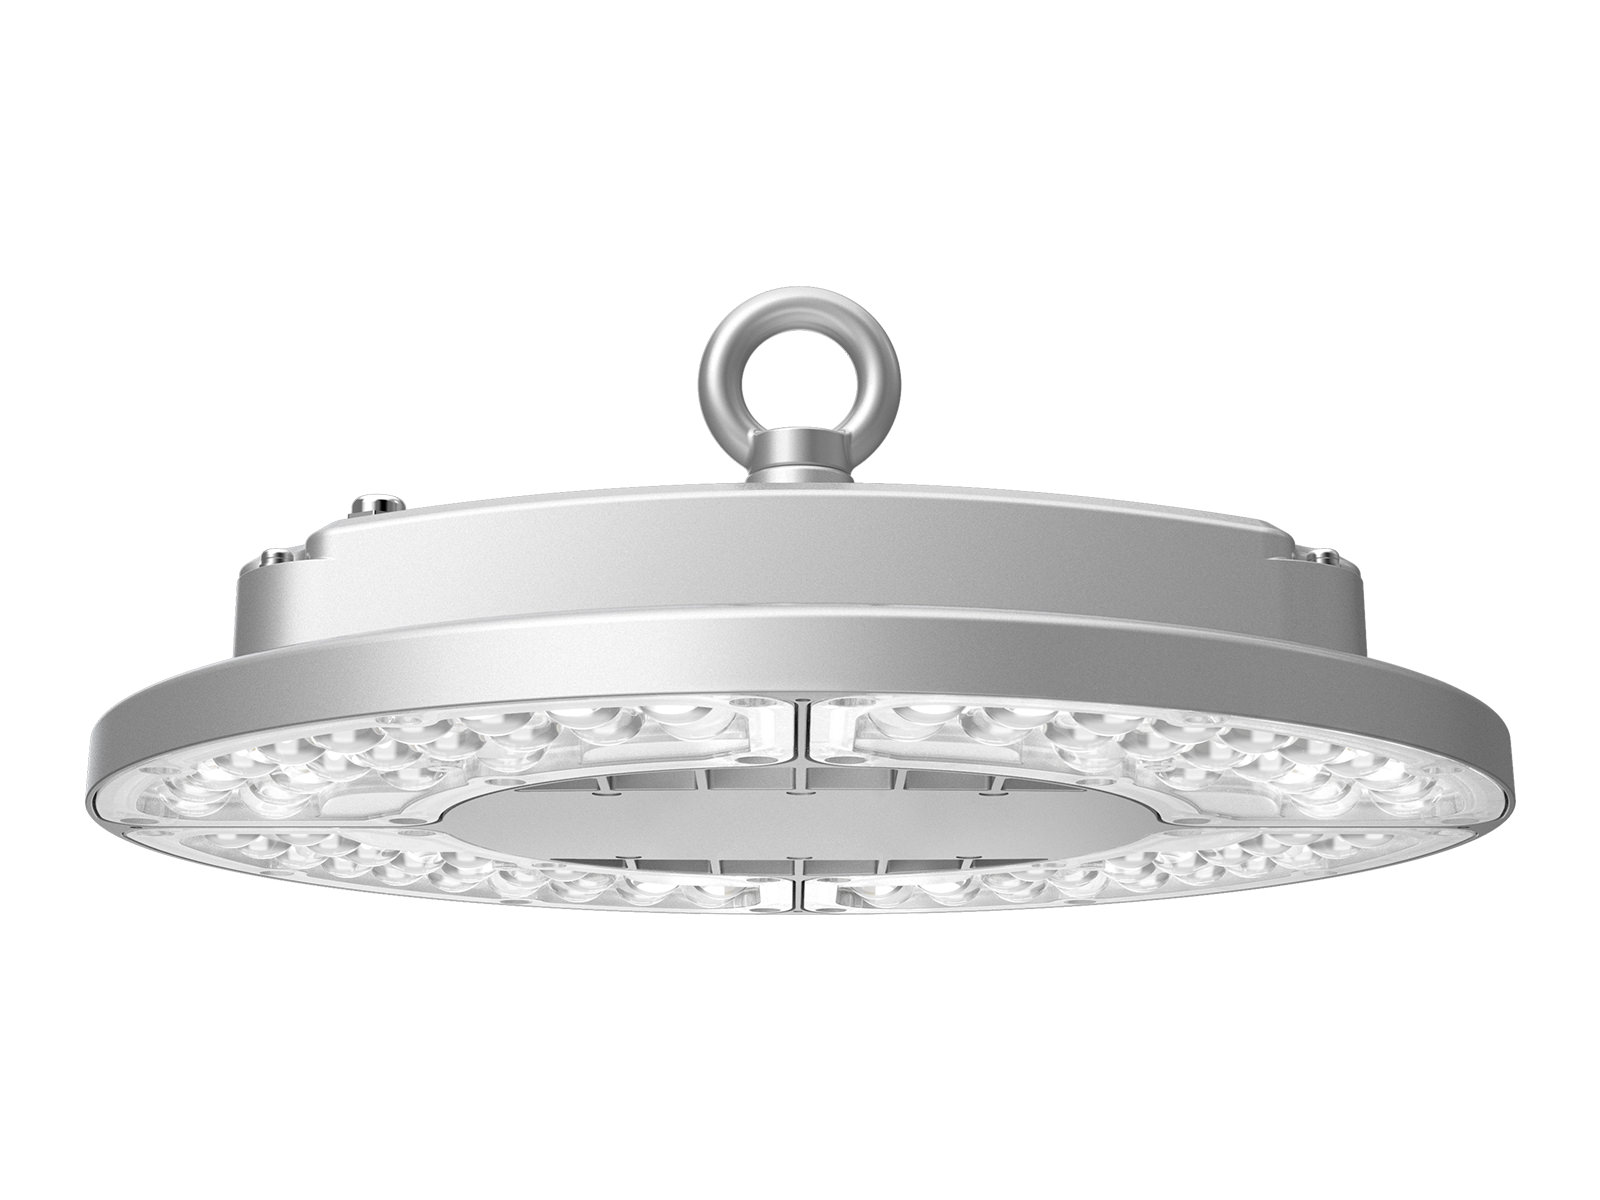 HB42 VENUS Exquisite Low Glare Highbay, Shiny But Not Dazzling